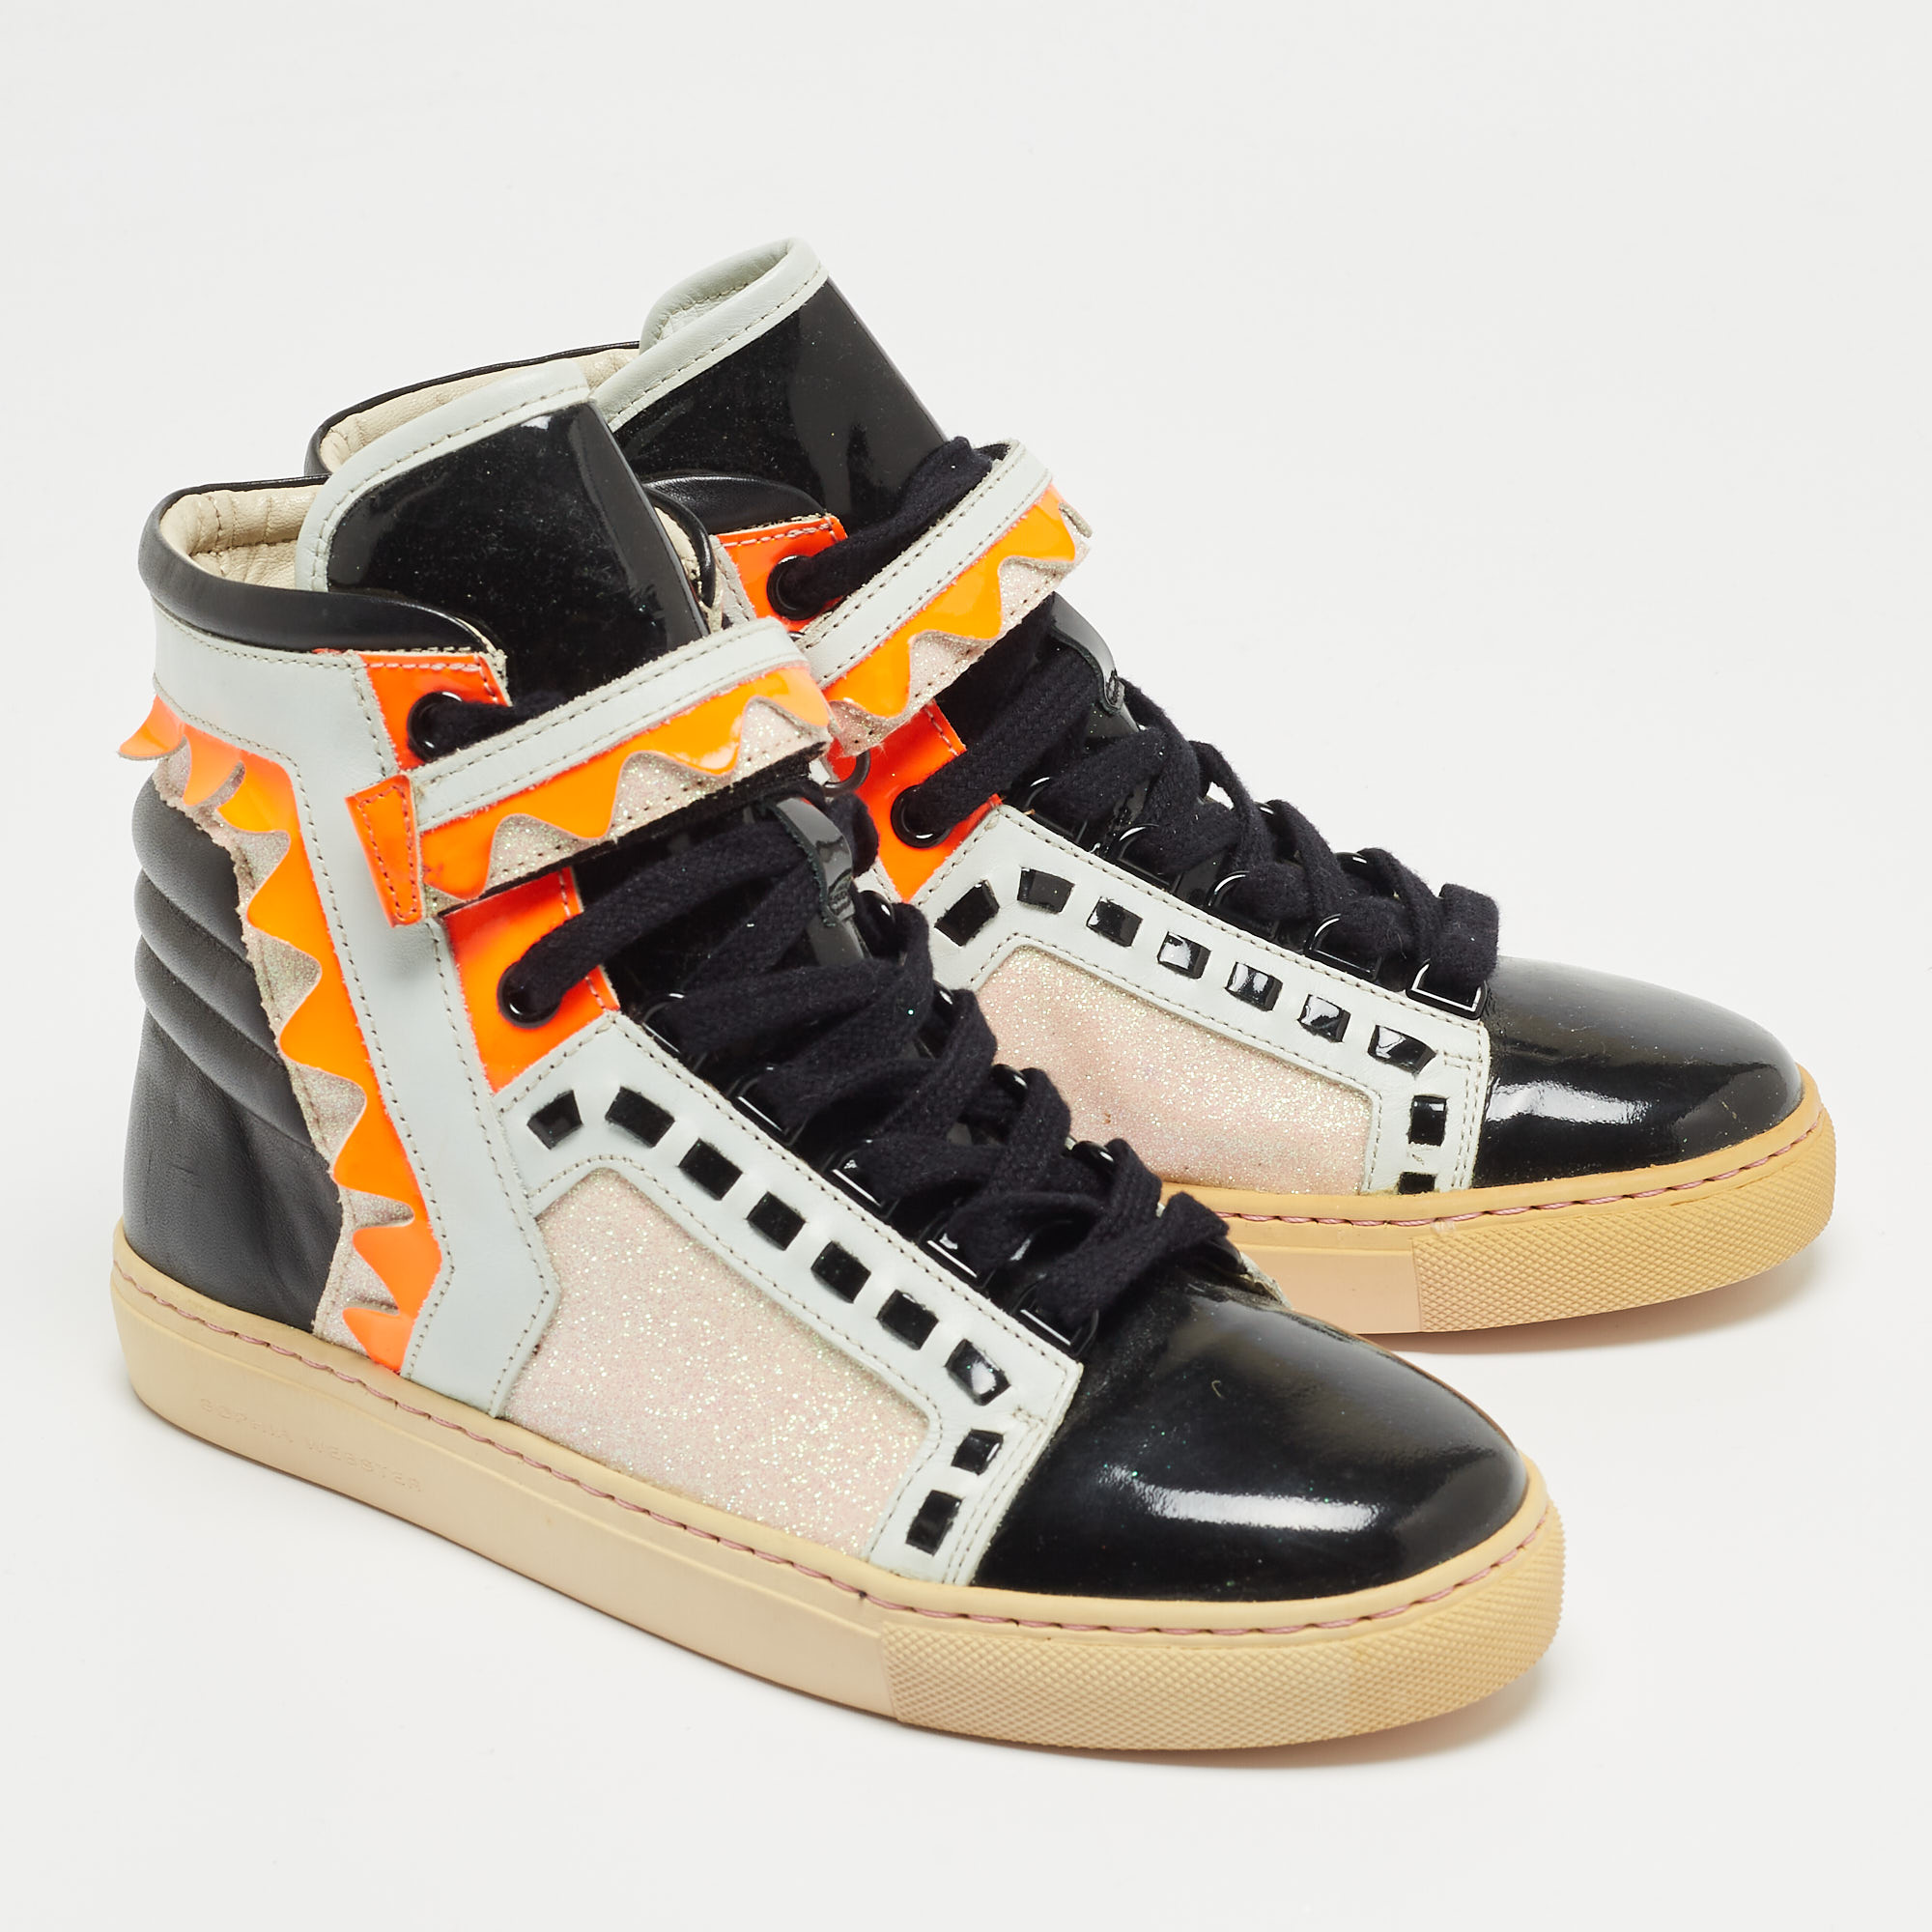 Sophia Webster Multicolor Patent, Leather And Glitter Riko High Top Sneakers Size 36